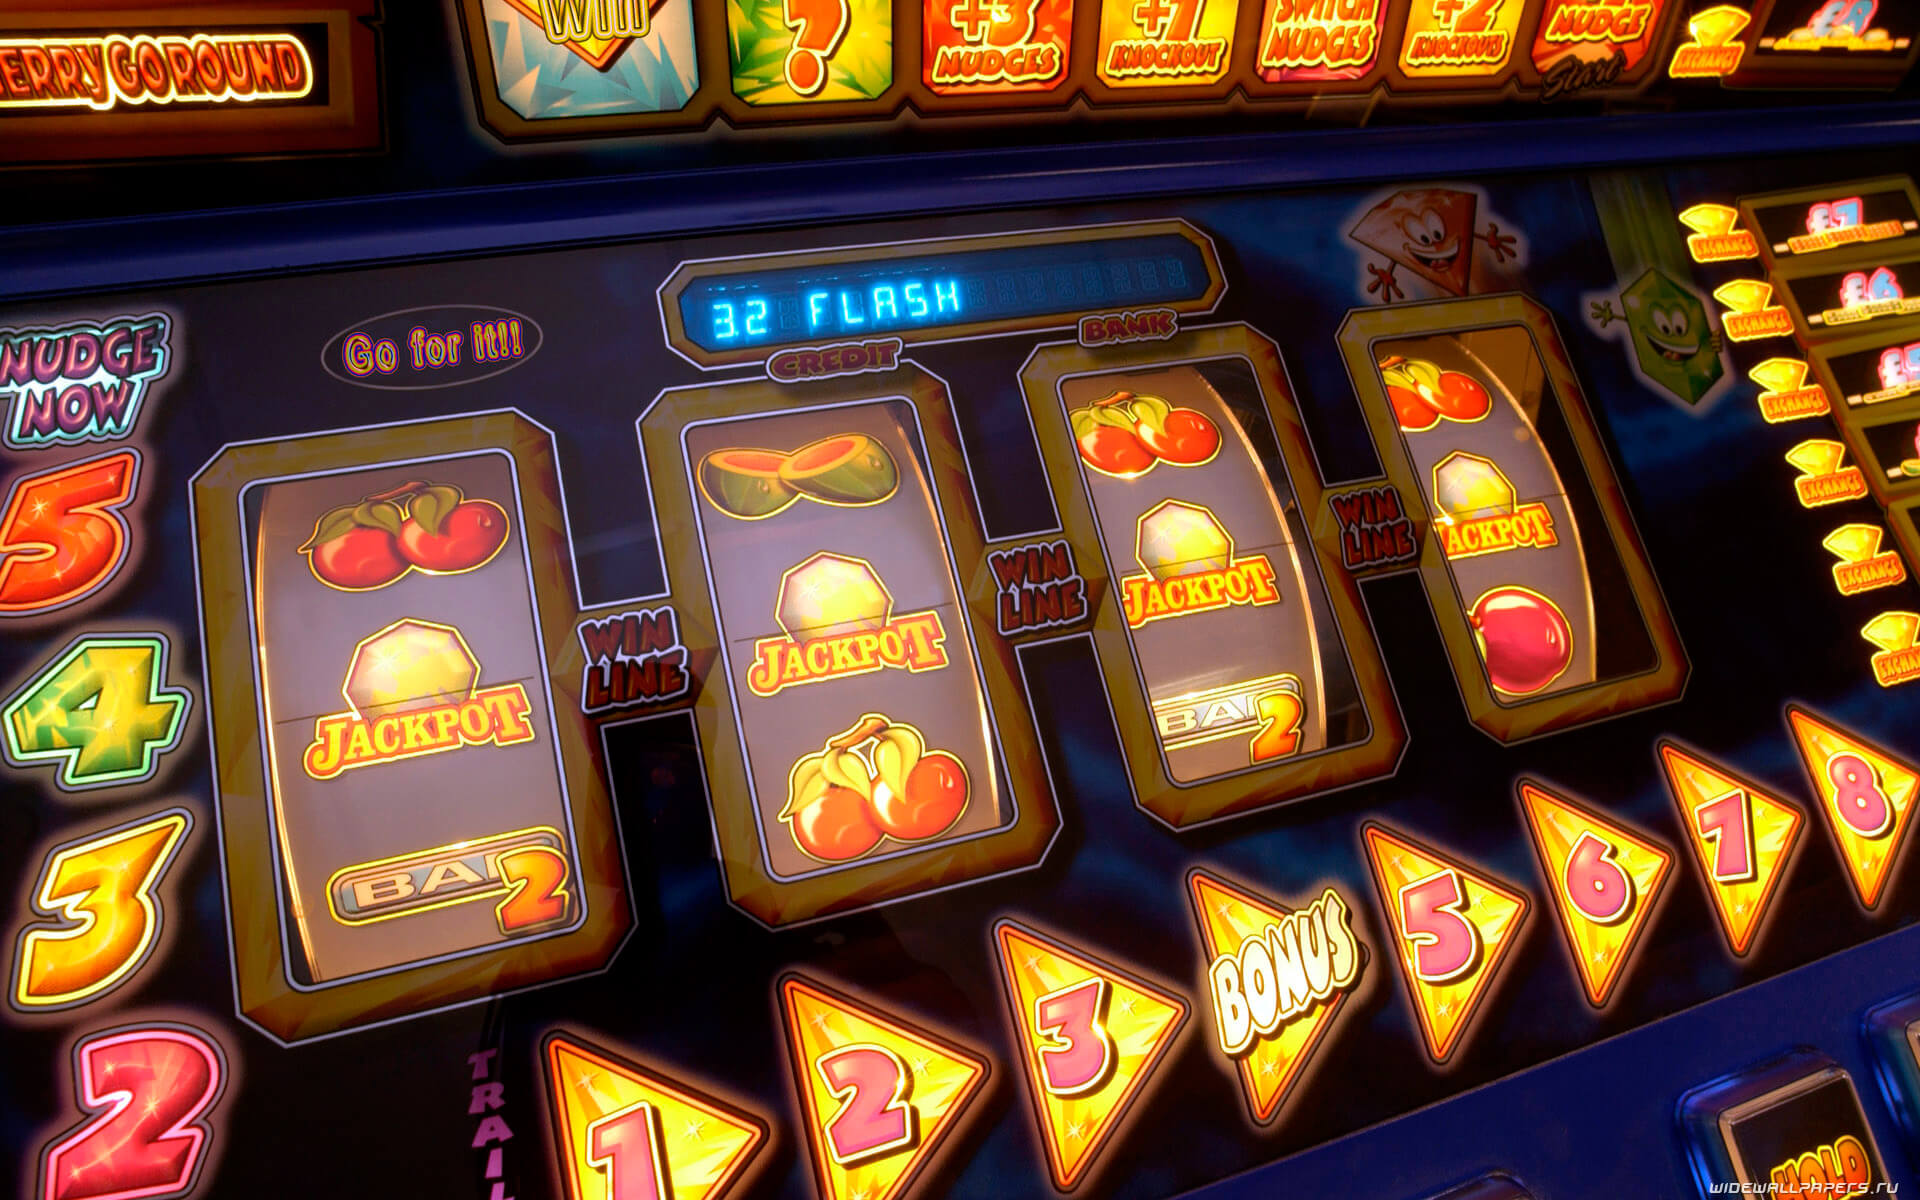 Best Slot Game To Win Money